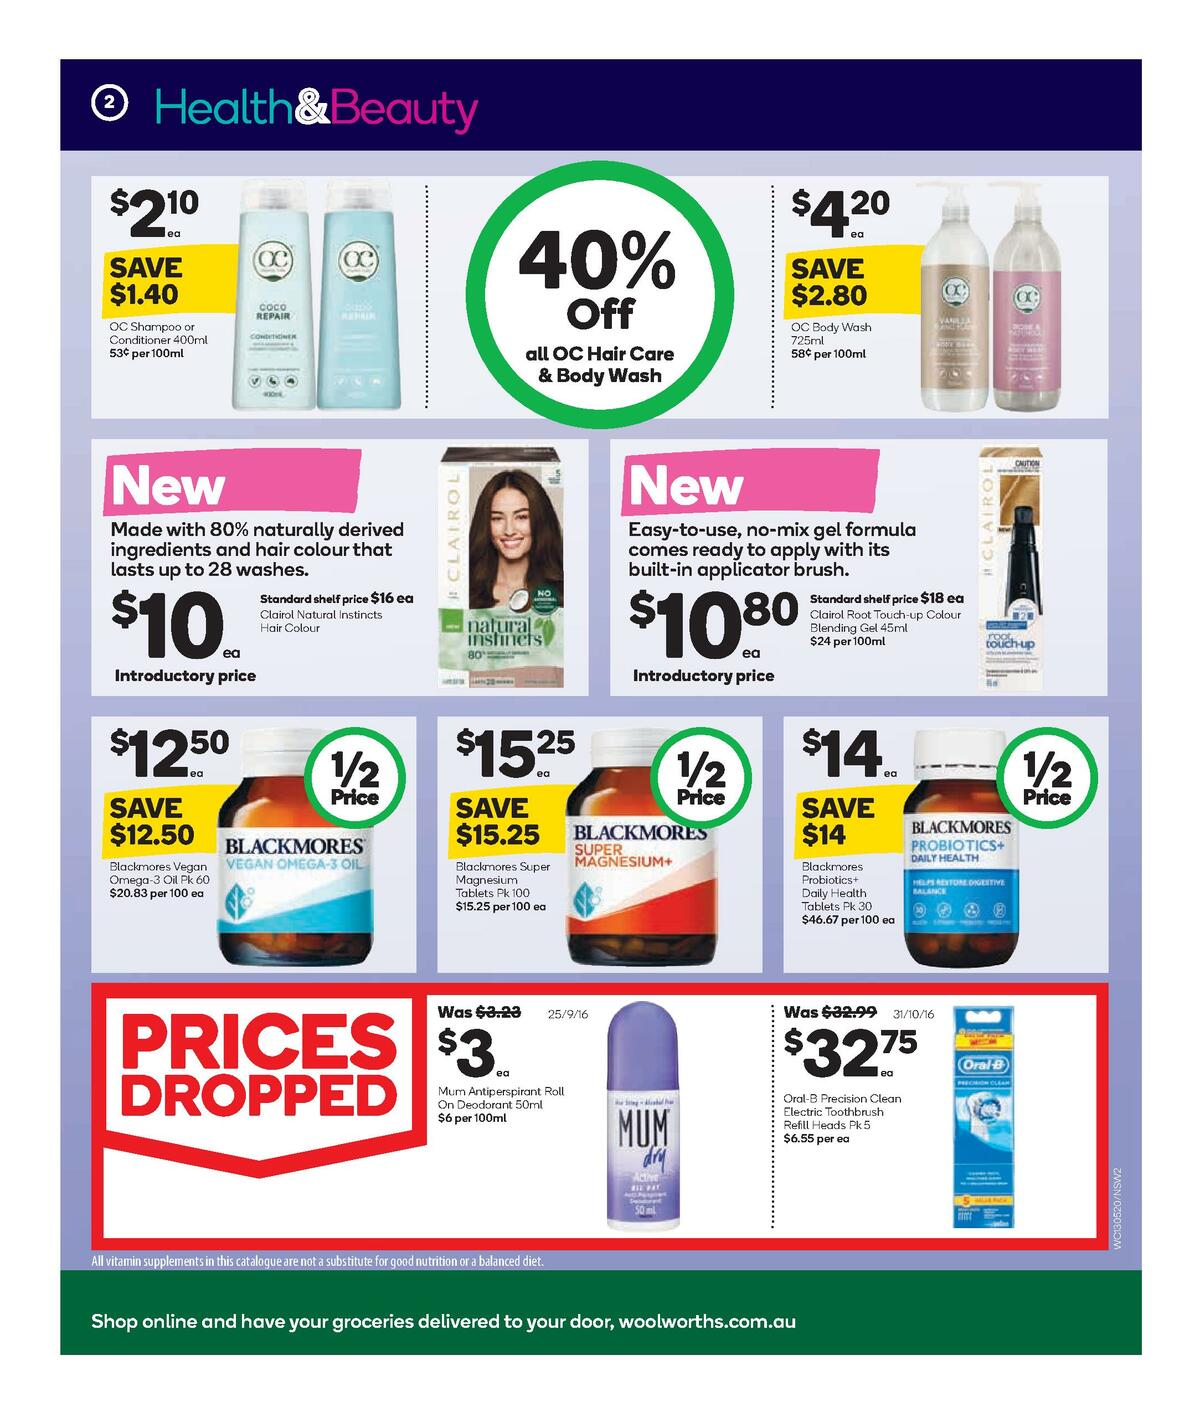 Woolworths Health & Beauty Catalogues from 13 May